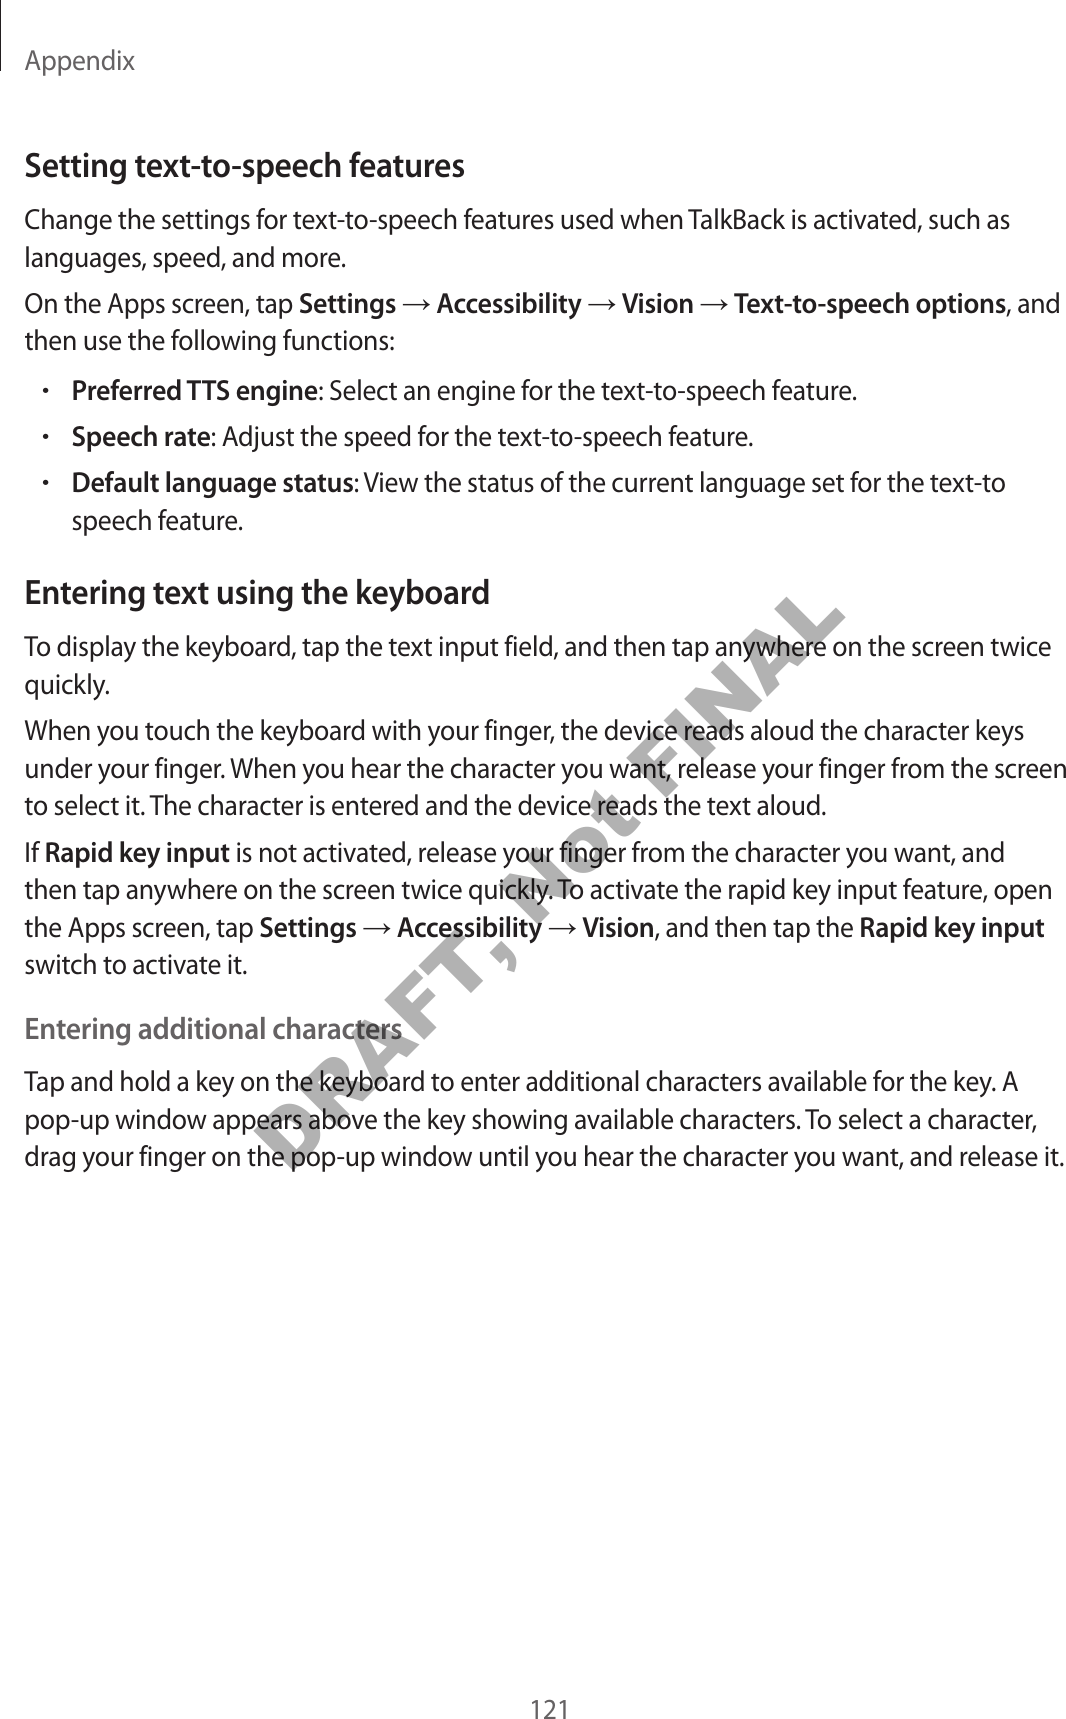 Appendix121Setting text-to-speech featuresChange the settings for text-to-speech features used when TalkBack is activated, such as languages, speed, and more.On the Apps screen, tap Settings → Accessibility → Vision → Text-to-speech options, and then use the following functions:•Preferred TTS engine: Select an engine for the text-to-speech feature.•Speech rate: Adjust the speed for the text-to-speech feature.•Default language status: View the status of the current language set for the text-to speech feature.Entering text using the keyboardTo display the keyboard, tap the text input field, and then tap anywhere on the screen twice quickly.When you touch the keyboard with your finger, the device reads aloud the character keys under your finger. When you hear the character you want, release your finger from the screen to select it. The character is entered and the device reads the text aloud.If Rapid key input is not activated, release your finger from the character you want, and then tap anywhere on the screen twice quickly. To activate the rapid key input feature, open the Apps screen, tap Settings → Accessibility → Vision, and then tap the Rapid key input switch to activate it.Entering additional charactersTap and hold a key on the keyboard to enter additional characters available for the key. A pop-up window appears above the key showing available characters. To select a character, drag your finger on the pop-up window until you hear the character you want, and release it.DRAFT, Not FINAL